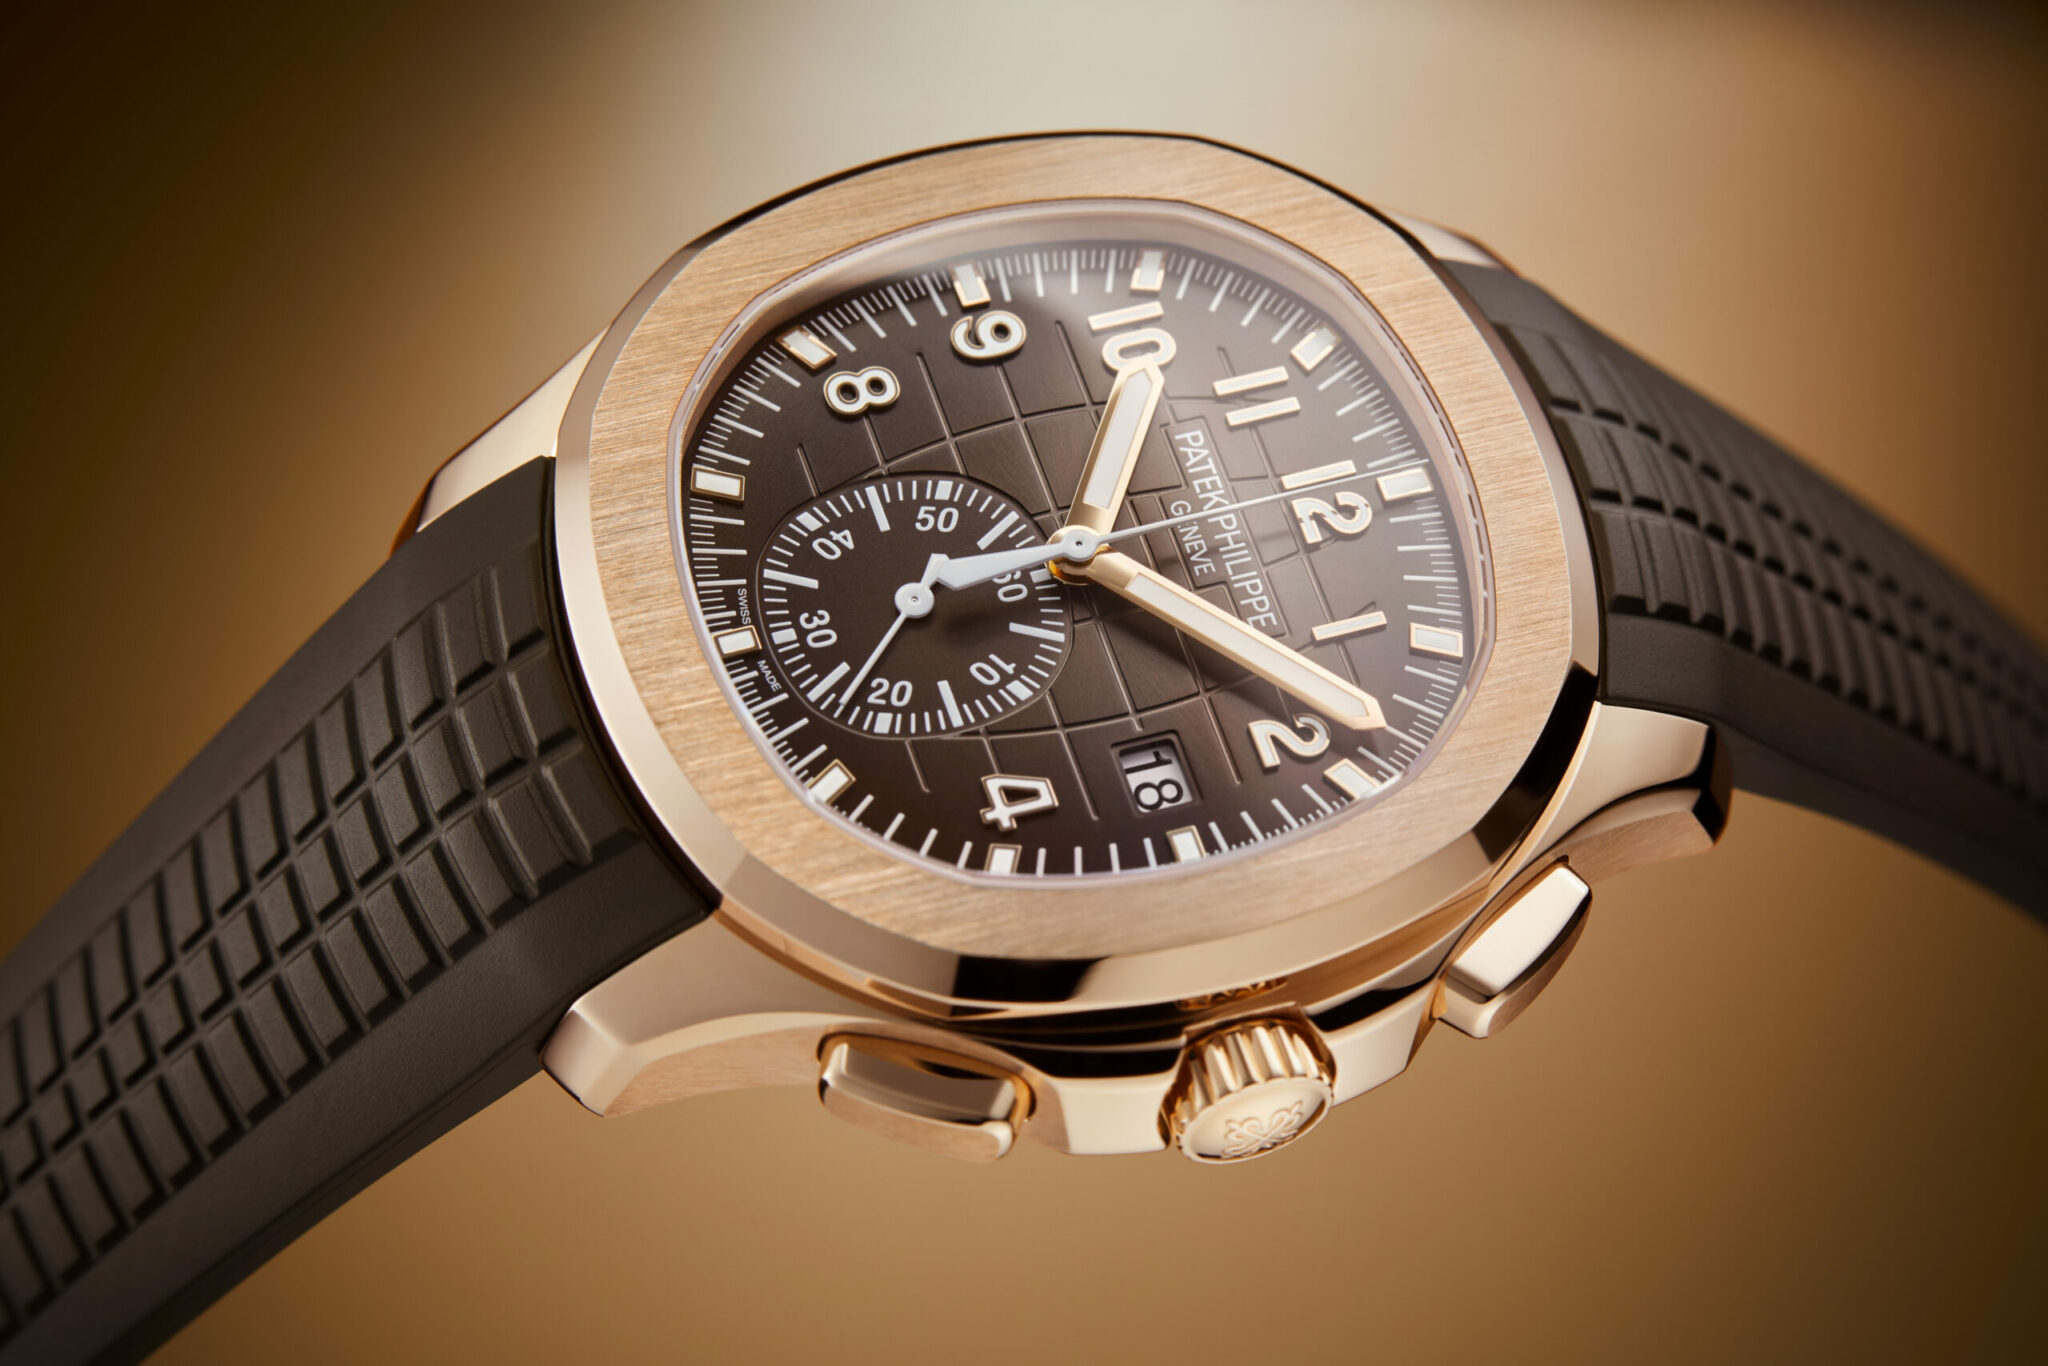 Patek Philippe Aquanaut Black Dial Automatic Men's Chronograph... for  $145,000 for sale from a Trusted Seller on Chrono24